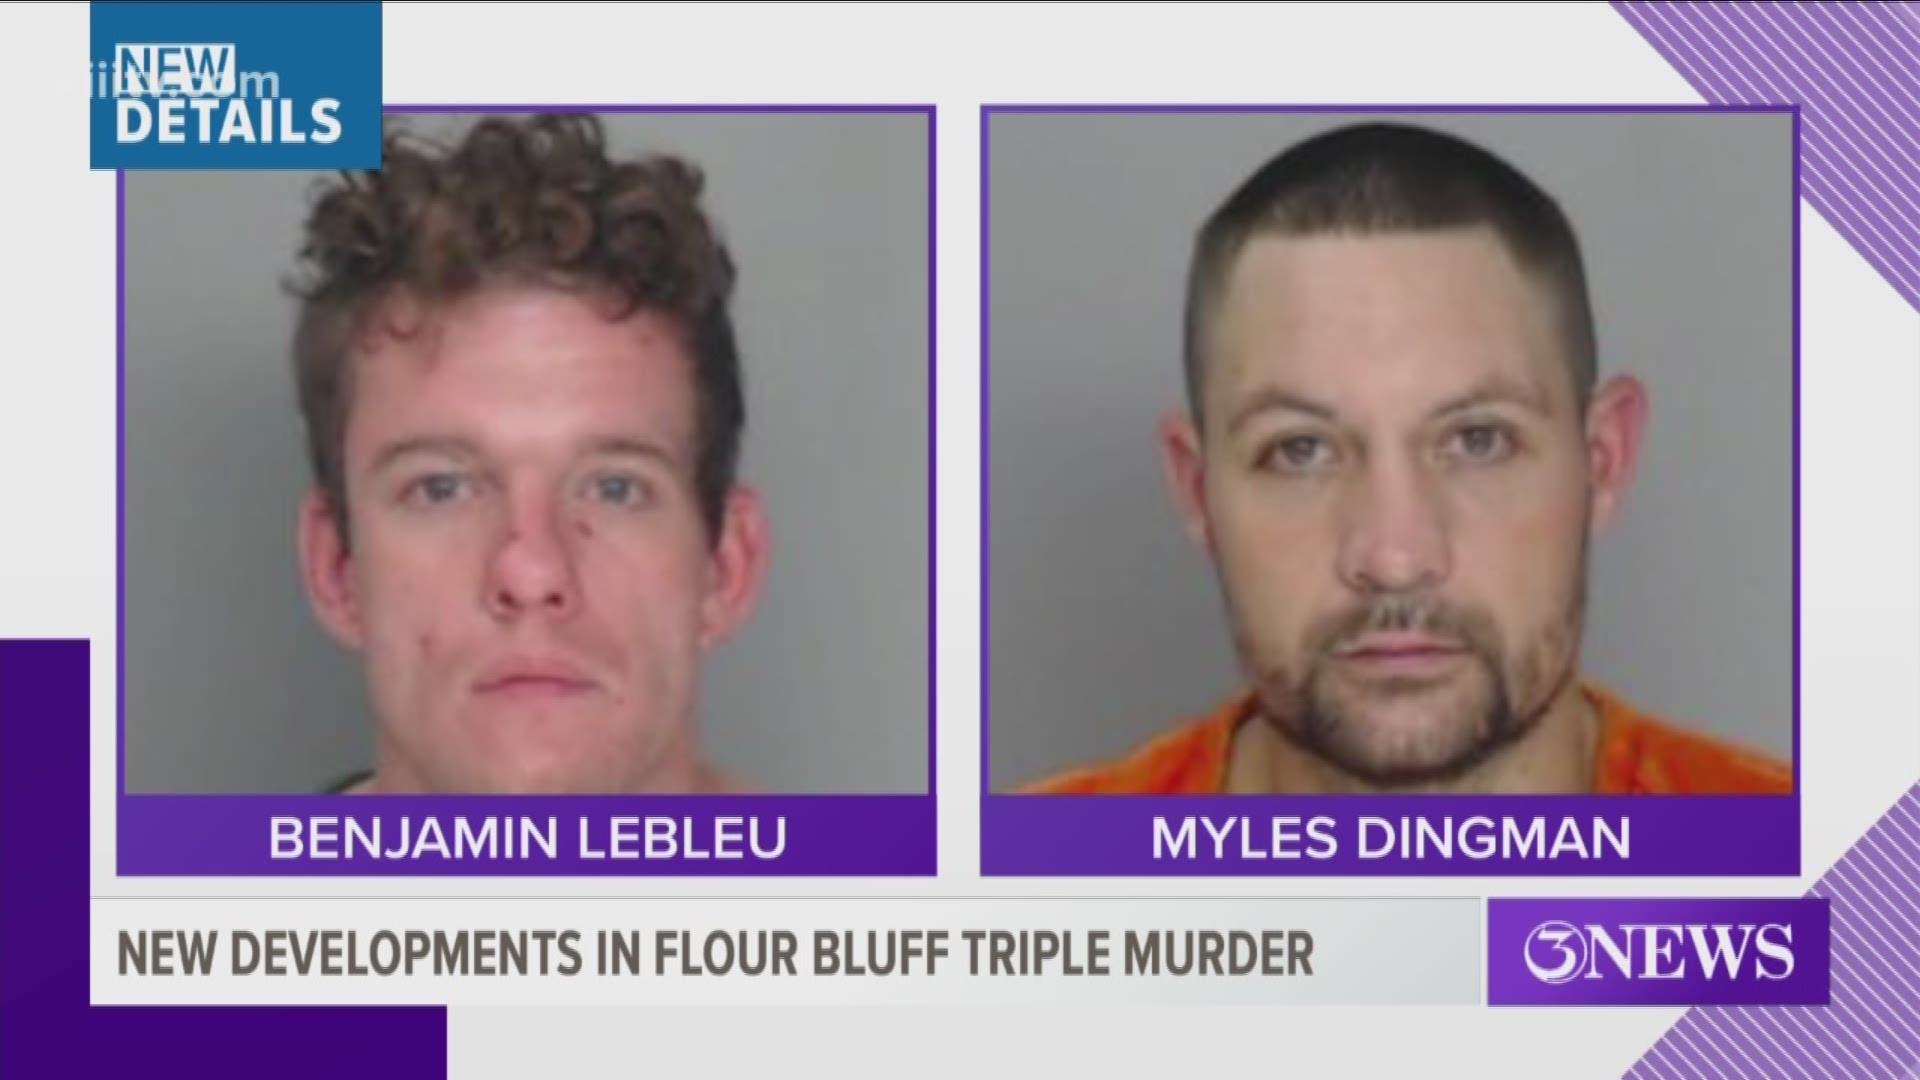 Court documents shed new light on Monday's arrest of two men in connection with a triple homicide in Flour Bluff.